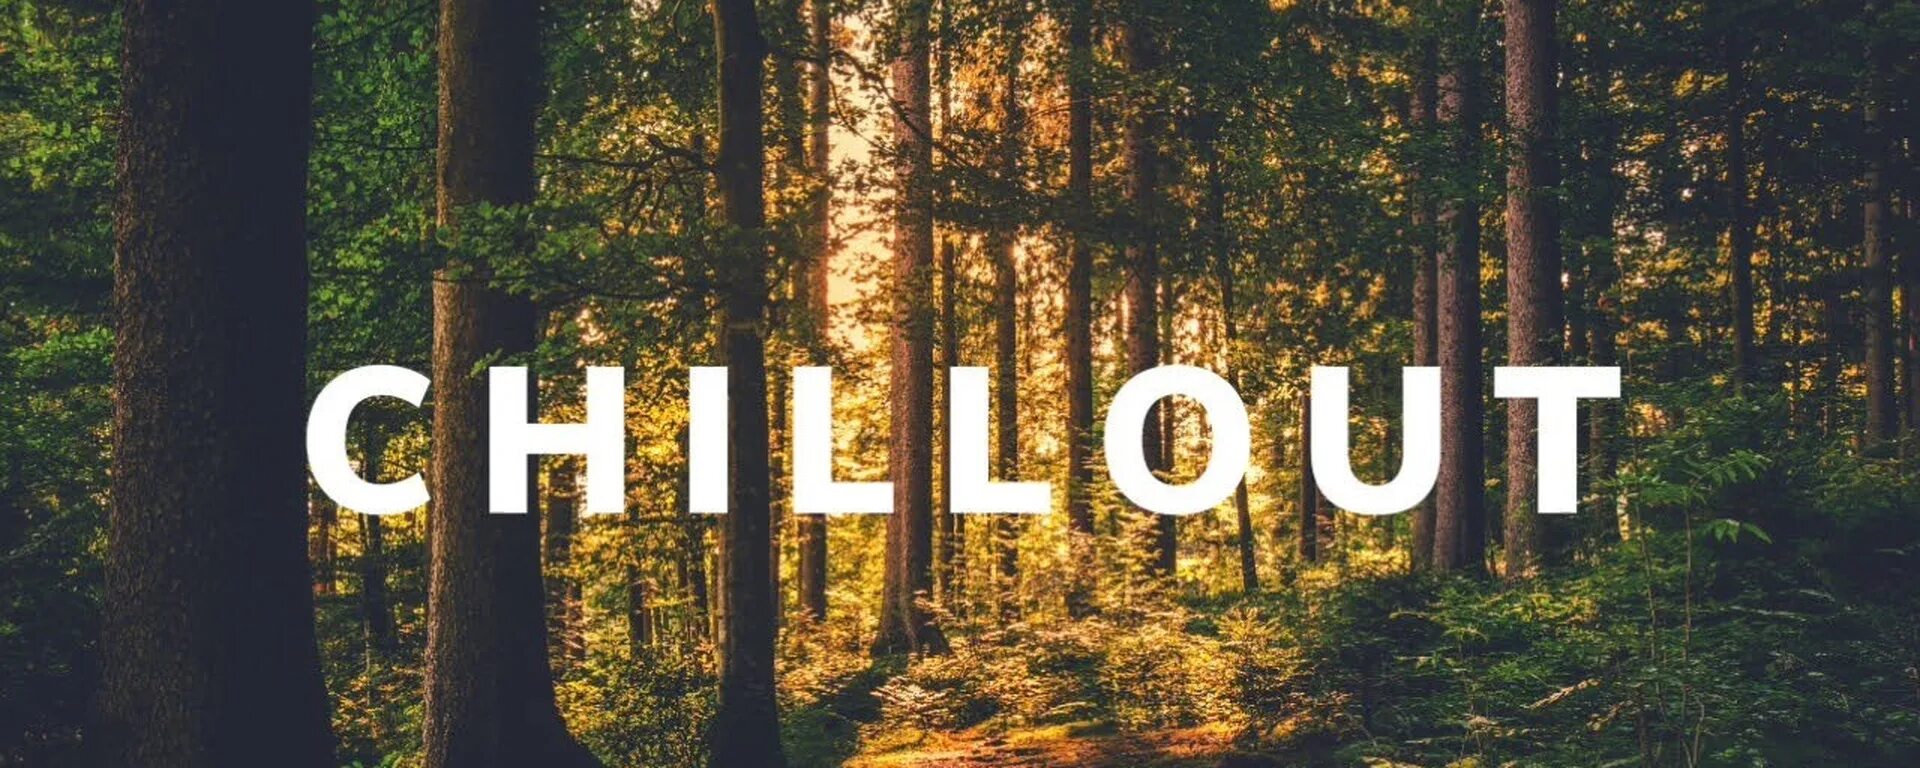 Чил лет. Chill out. Иконка Chillout. Надпись чил. Знак Chill.